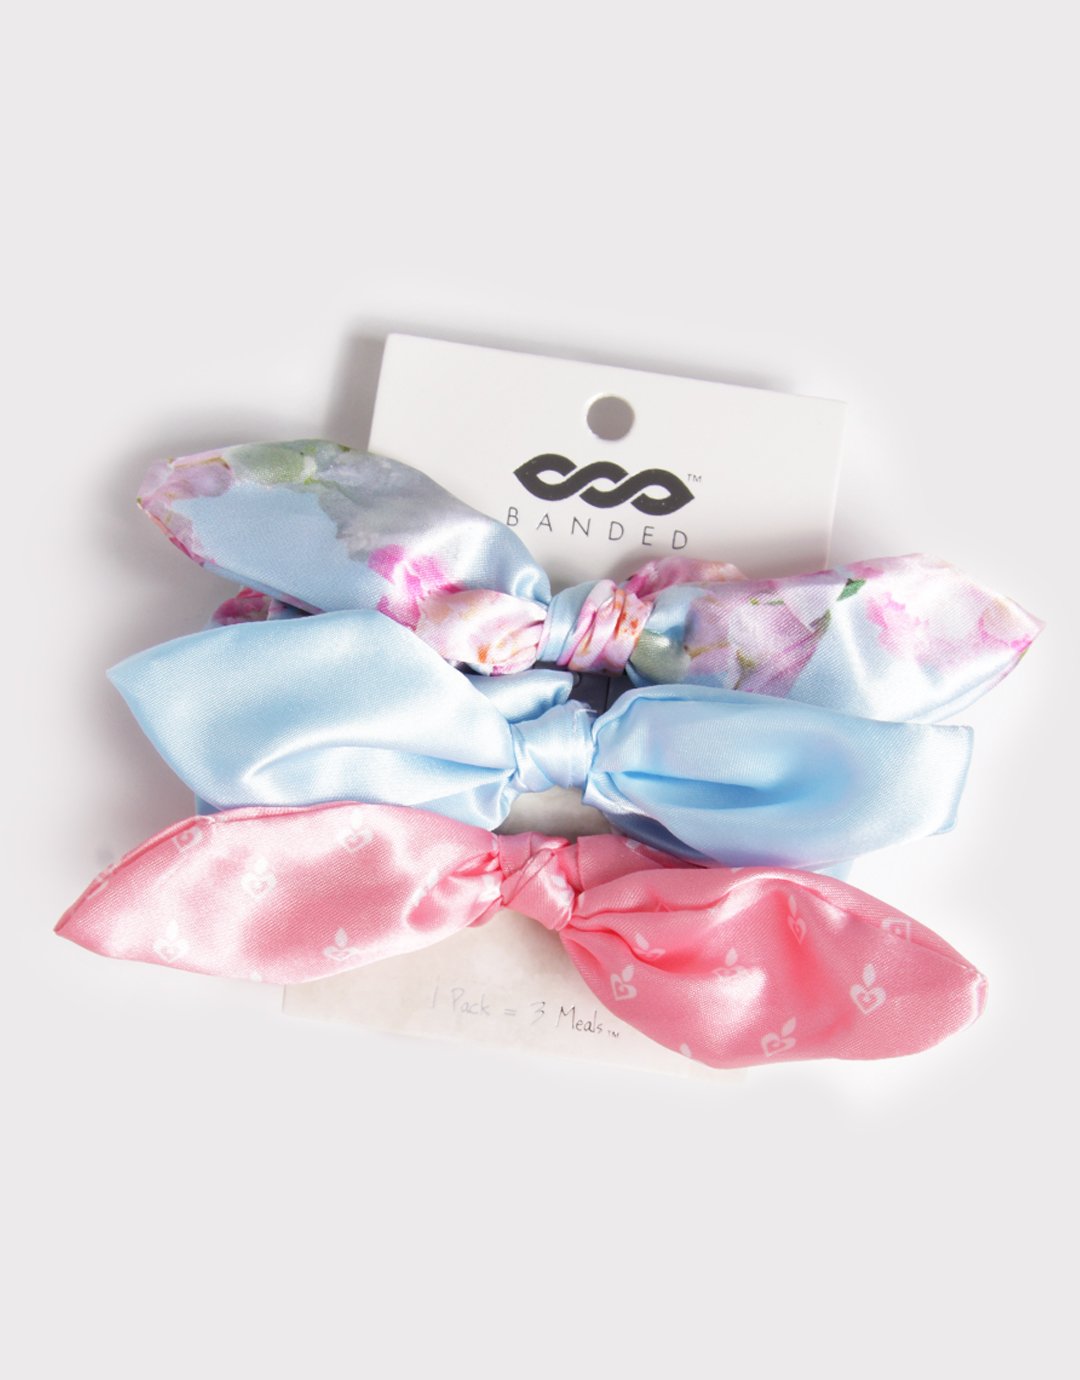 BANDED Women’s Premium Hair Accessories - Peony Splendor - 3 Pack Bow Scrunchies